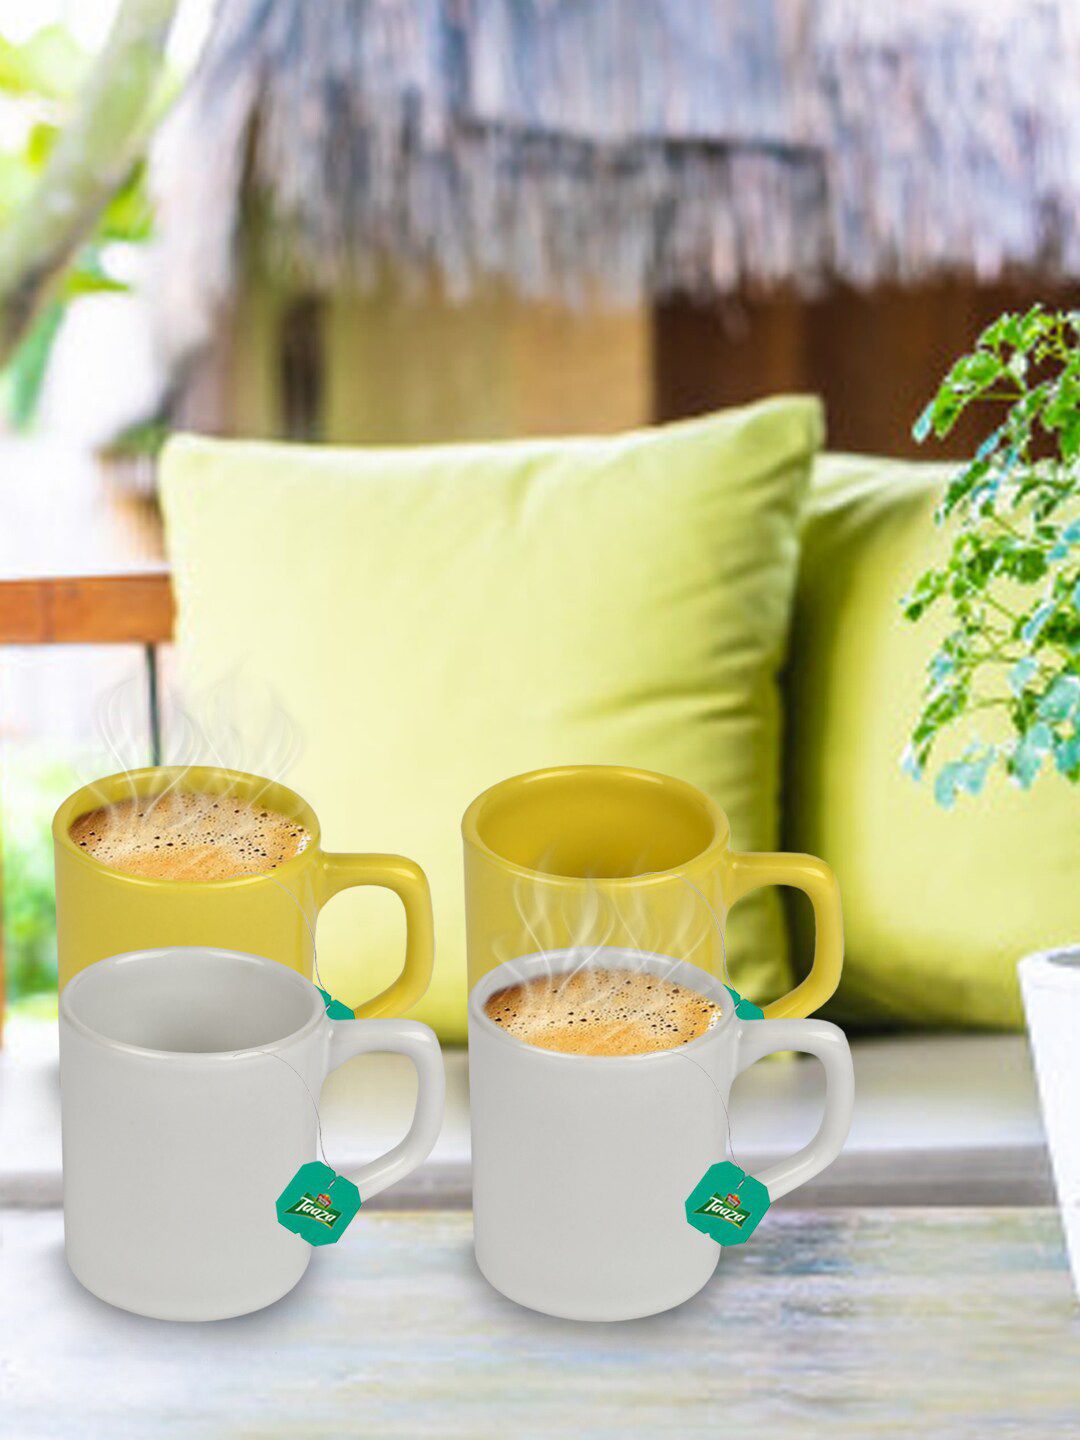 URBAN CHEF Set of 4 White & Green Ceramic Glossy Cups Price in India